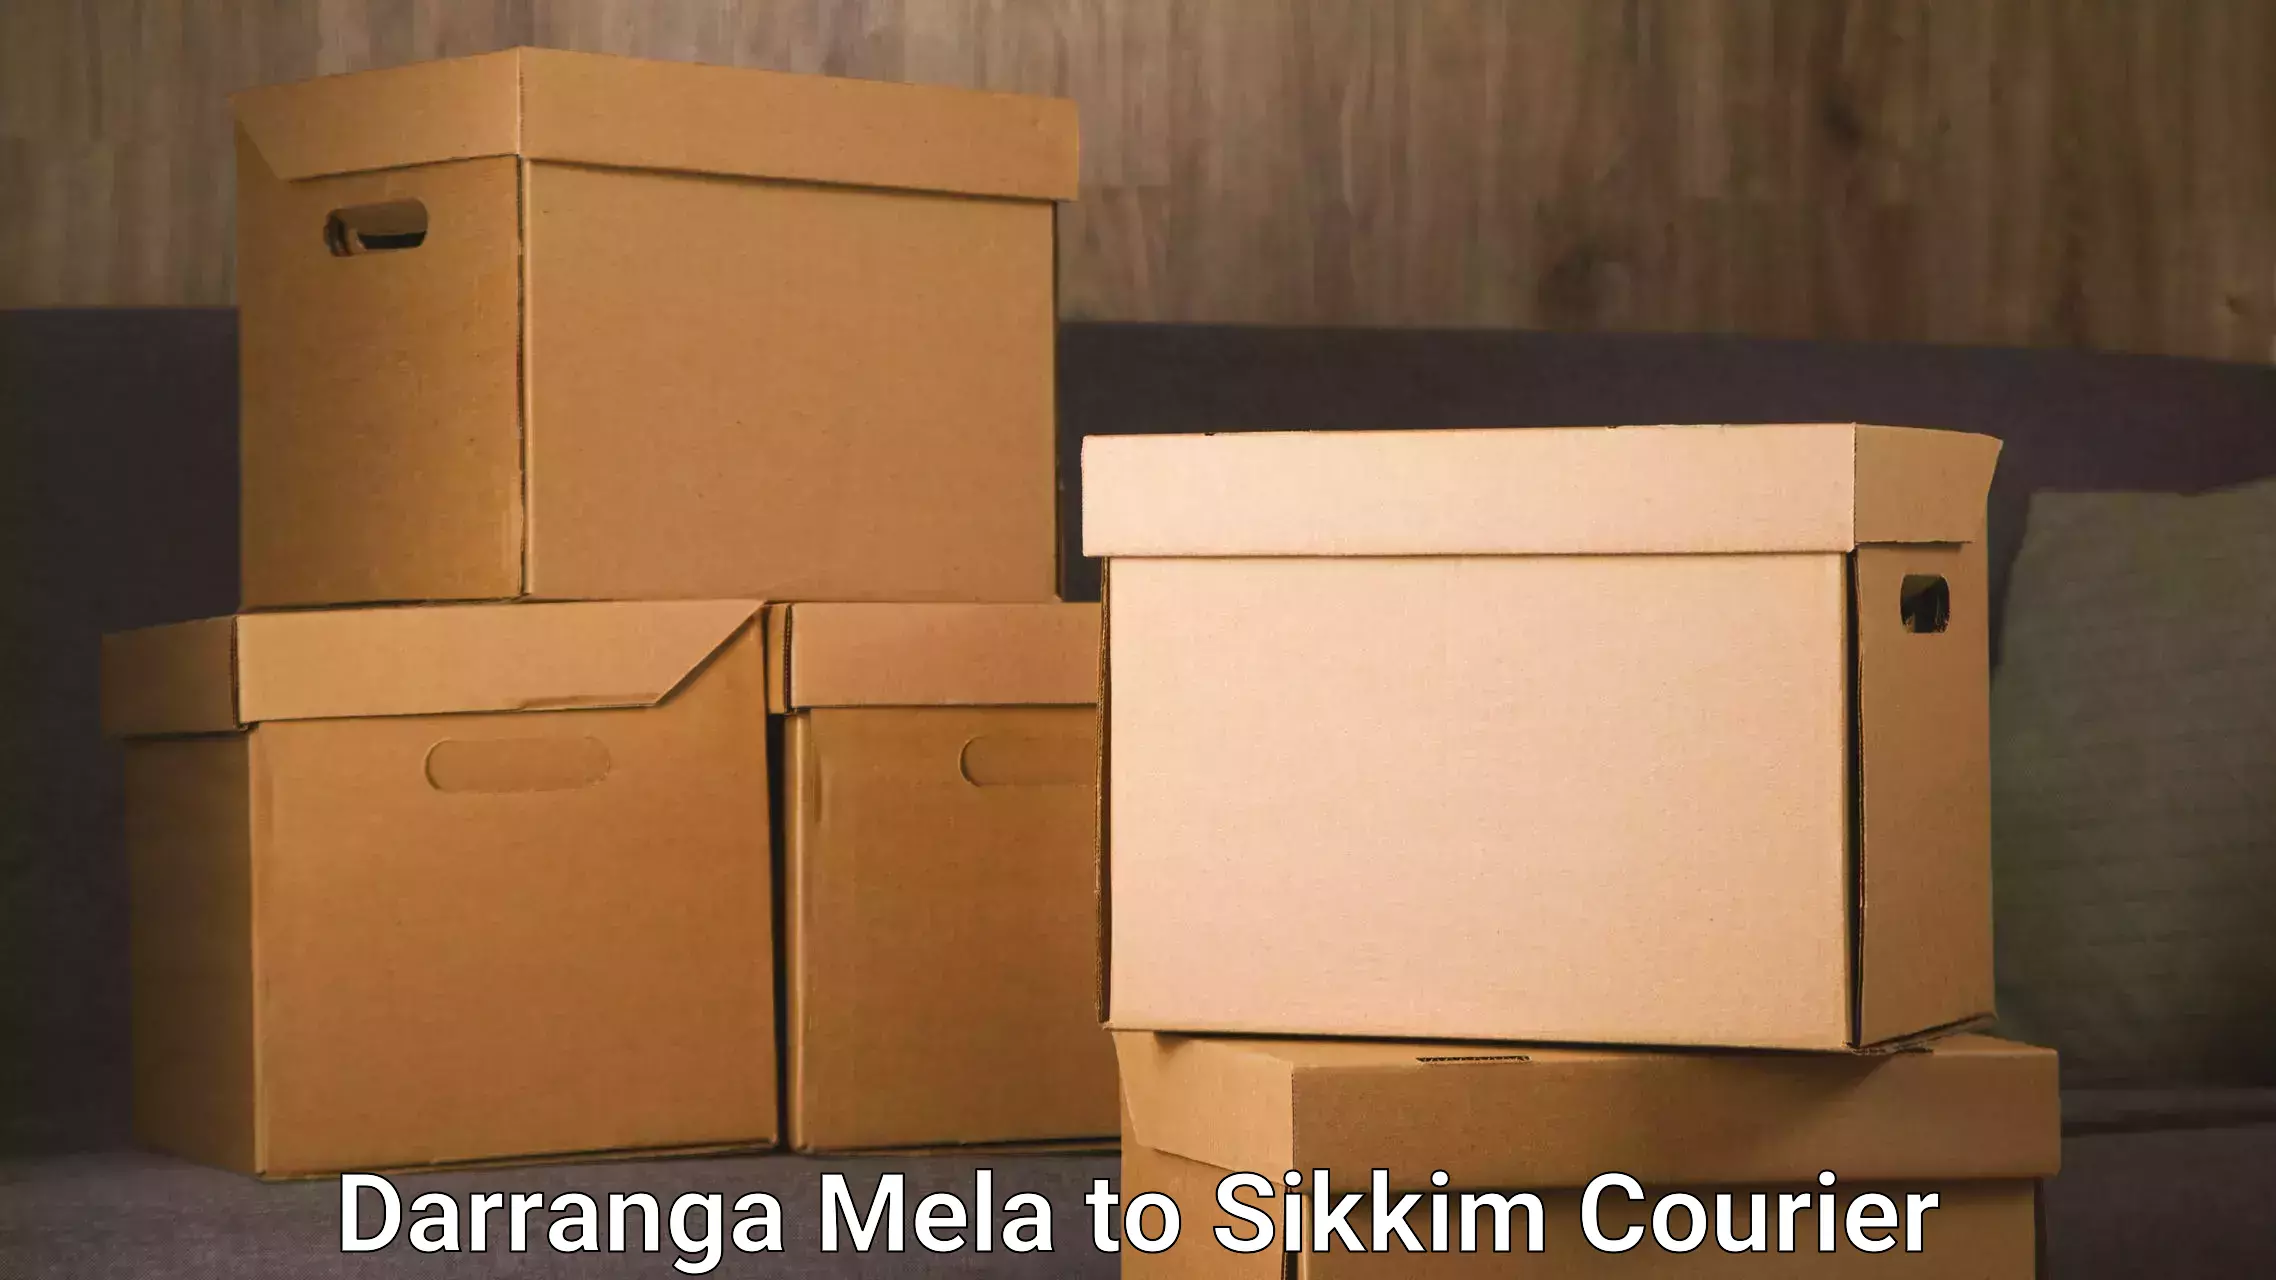 Same-day delivery solutions Darranga Mela to East Sikkim